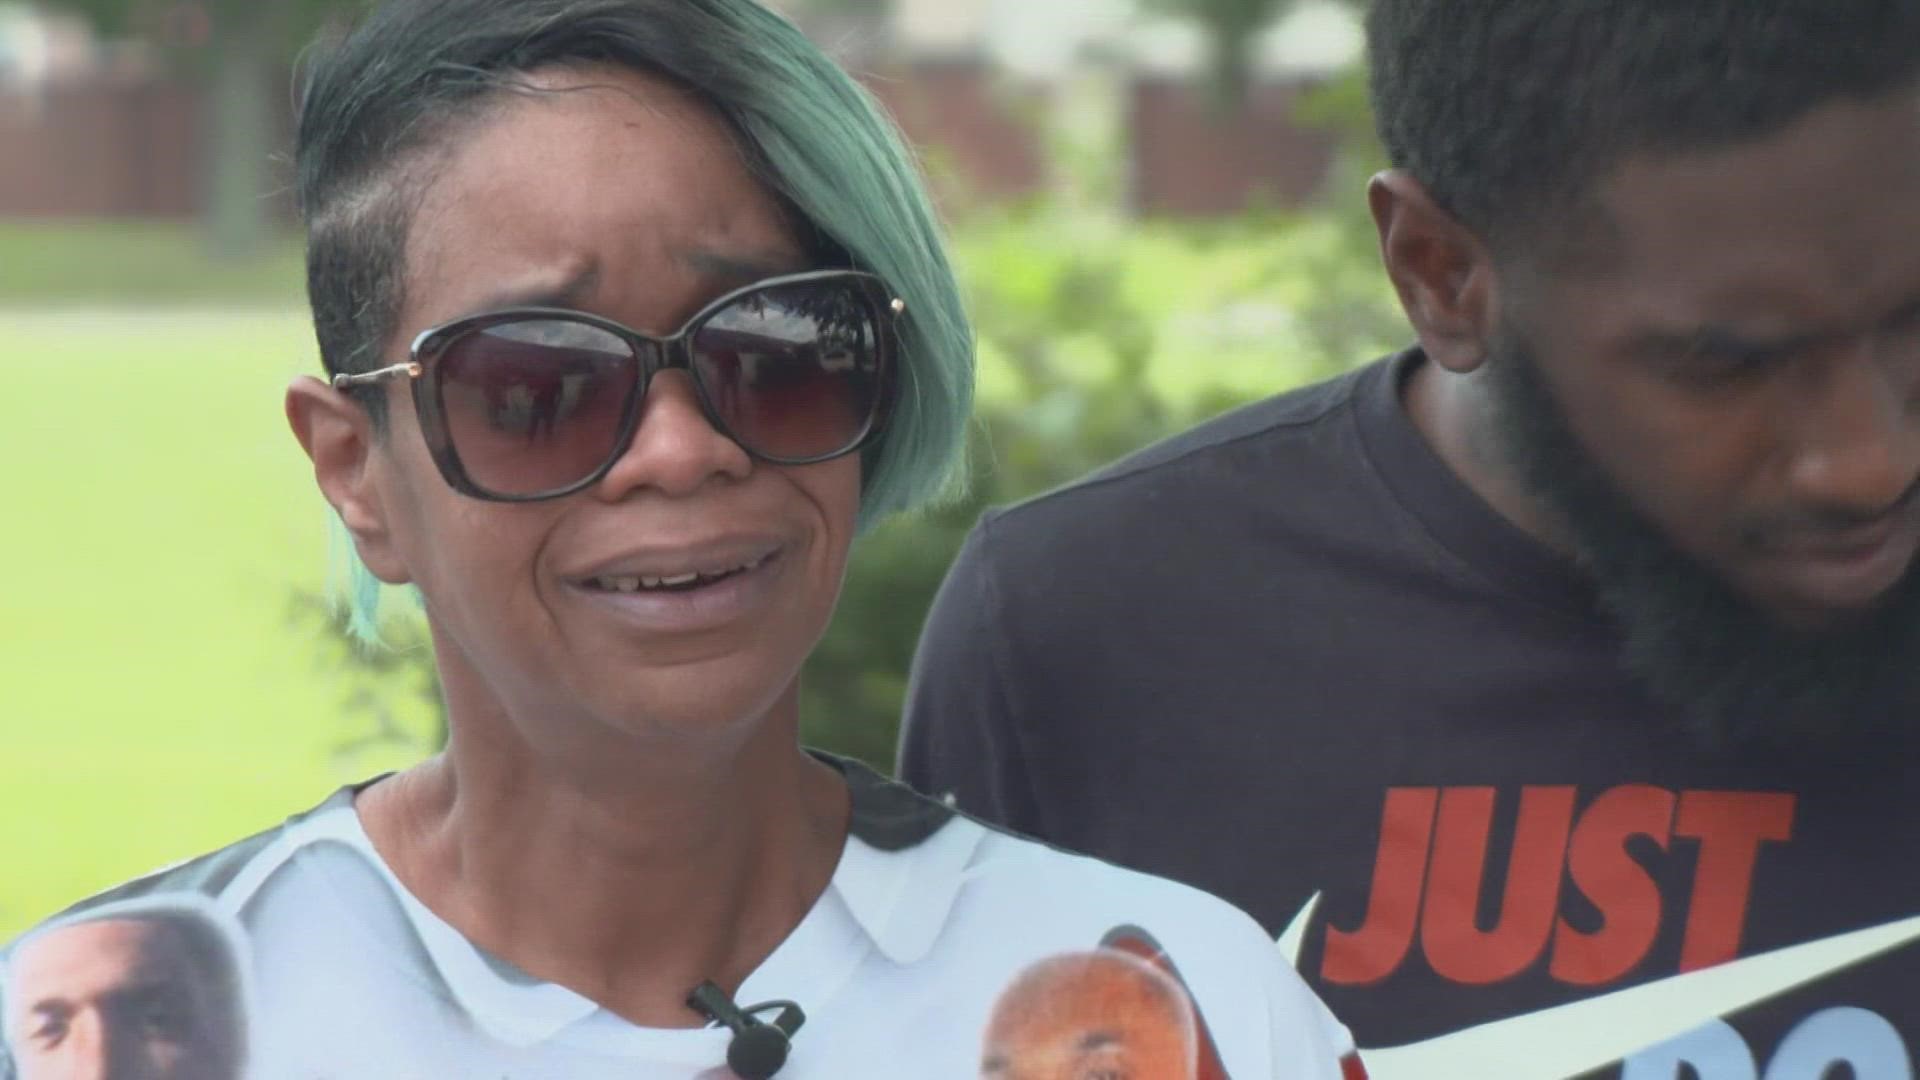 “I need justice,” LaQuita Murray said. “I need the system to do what they were designed to do."